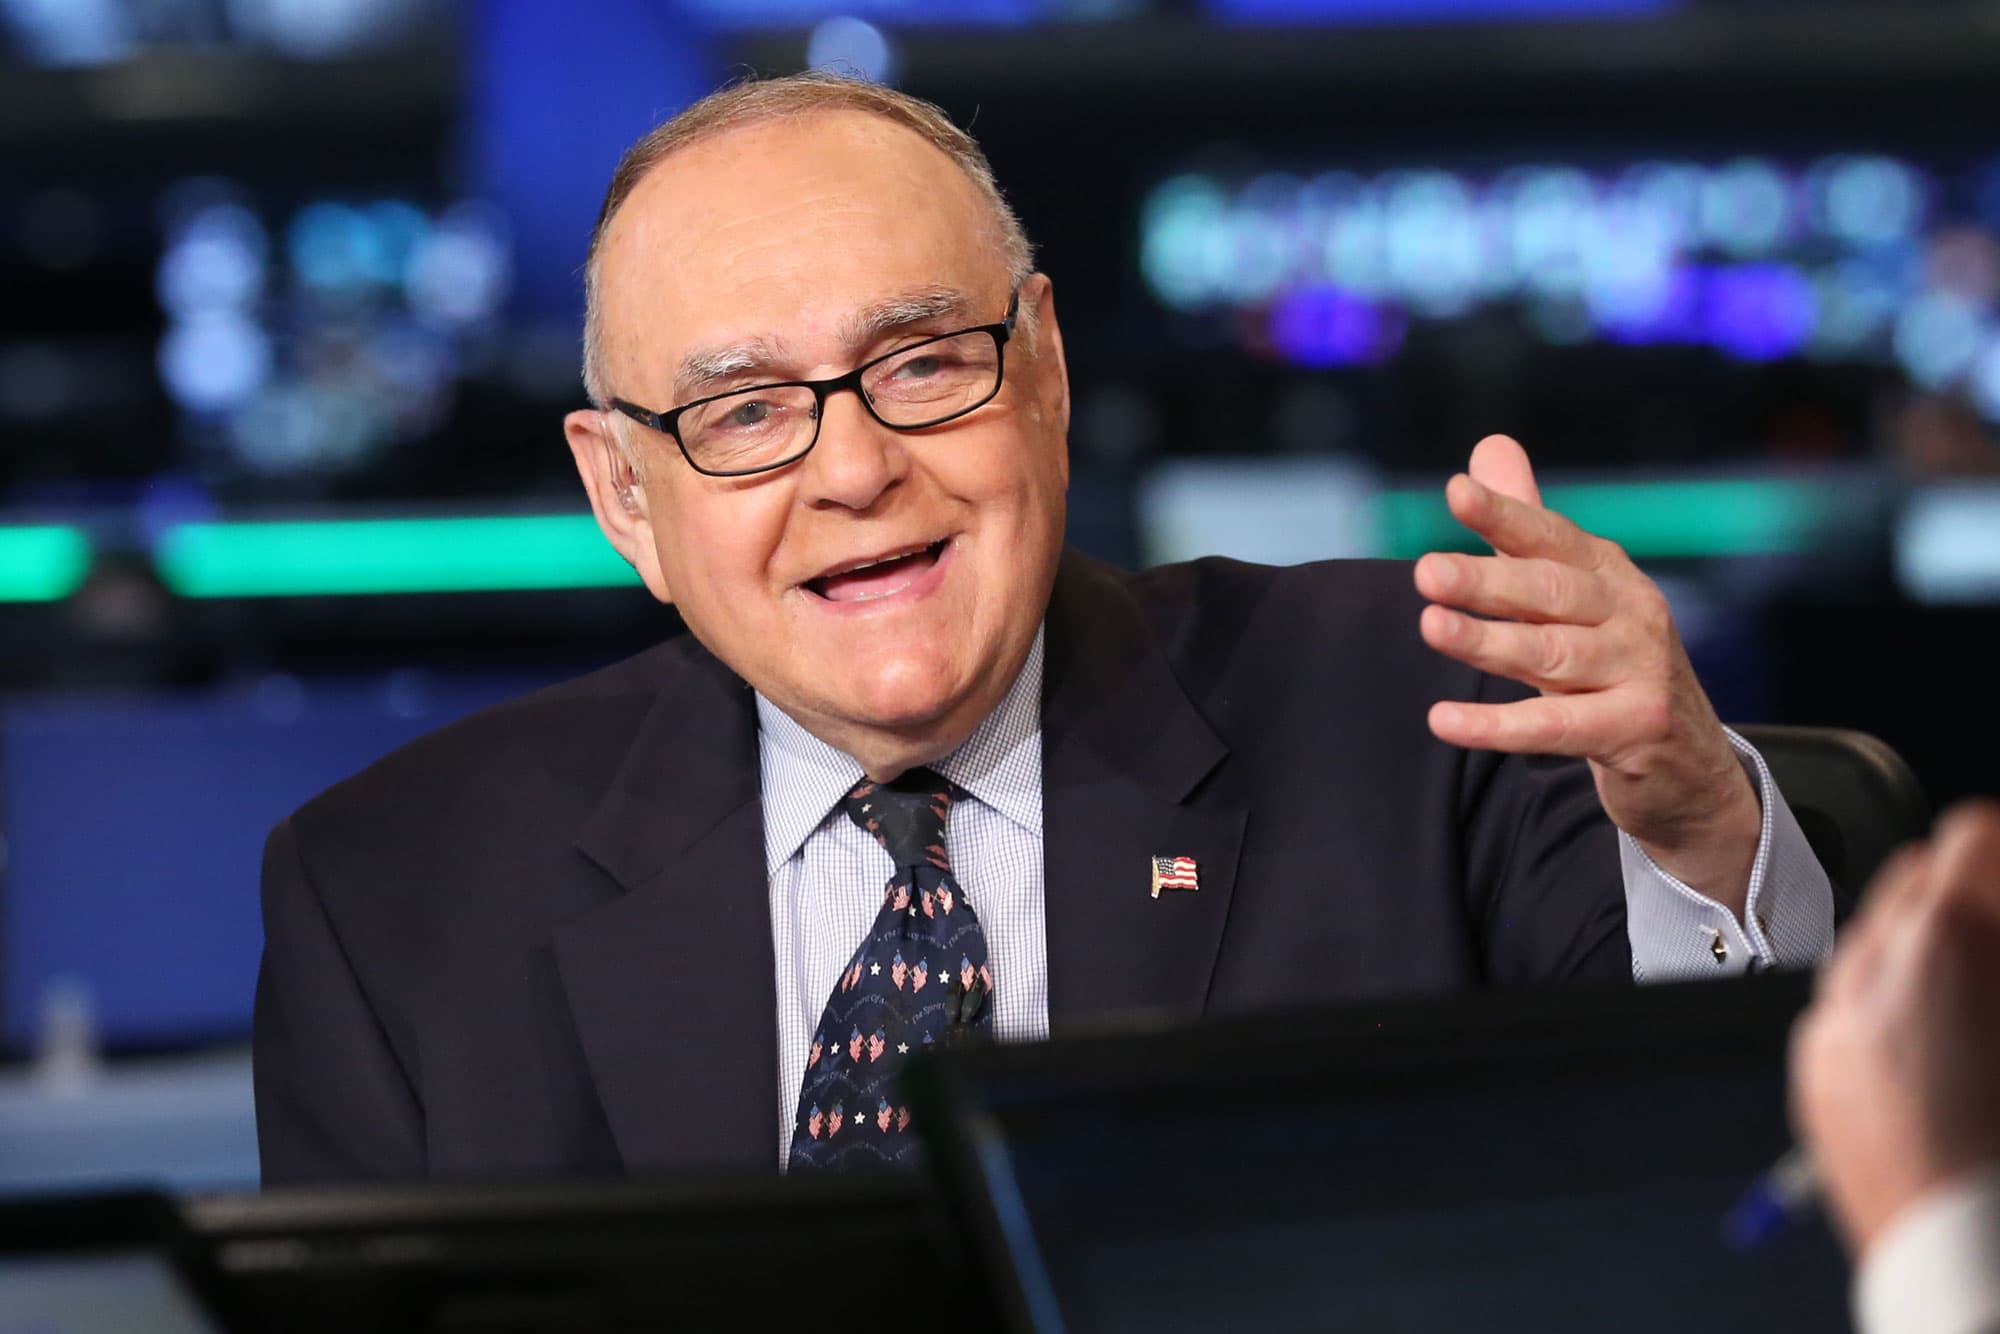 Leon Cooperman says his biggest position in the market now is very contrarian